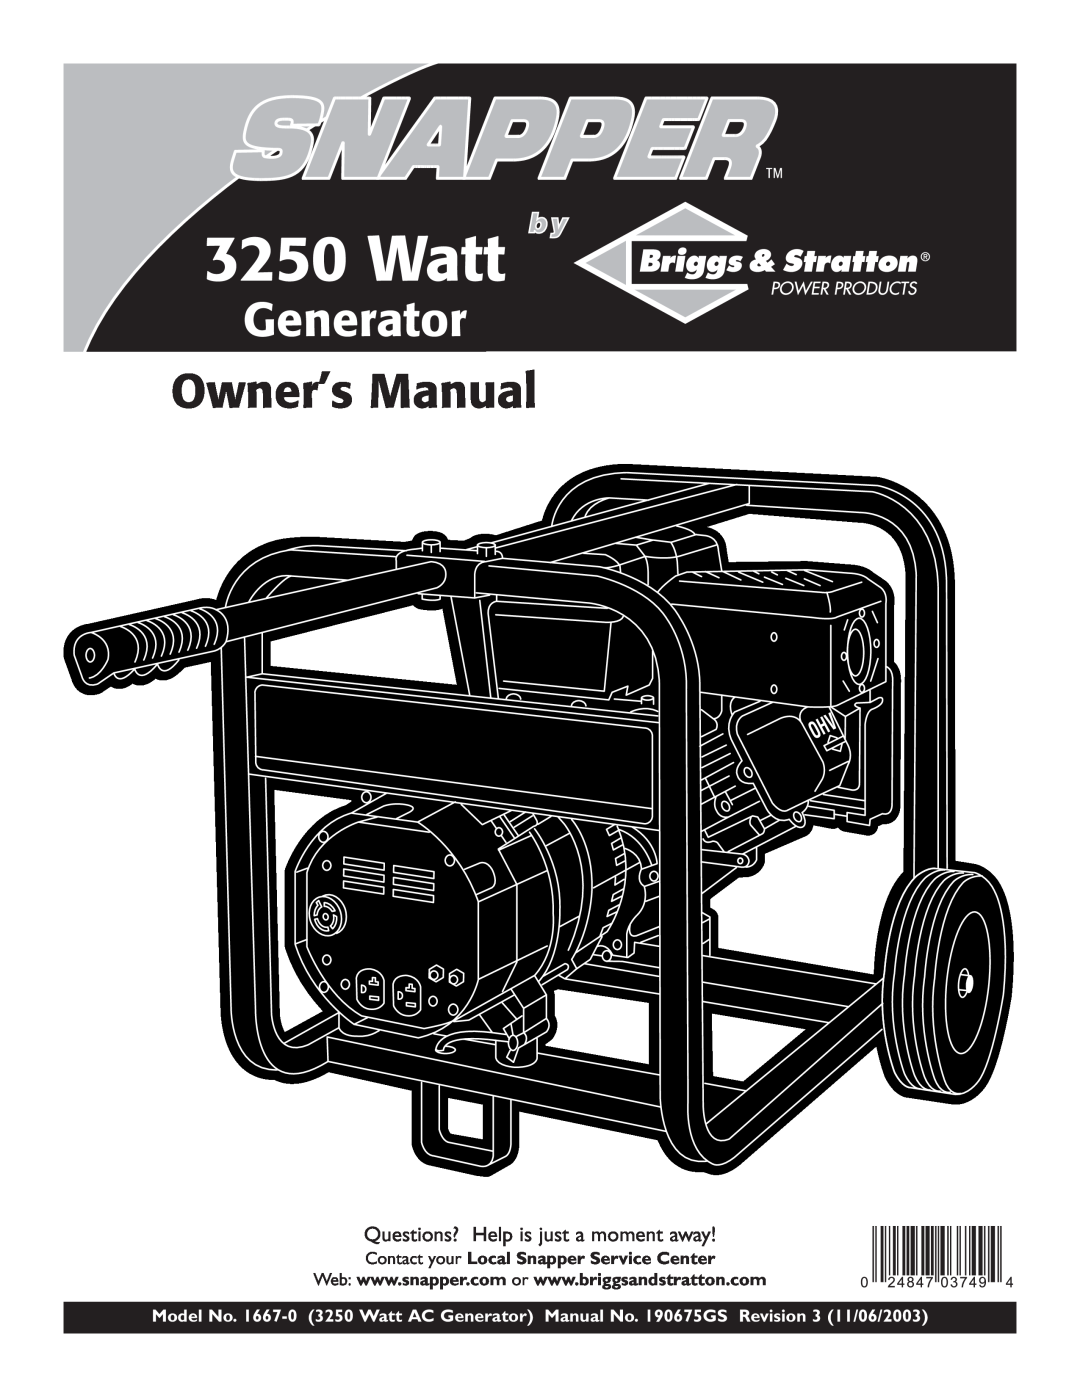 Snapper 1667-0 owner manual Questions? Help is just a moment away, Contact your Local Snapper Service Center, Watt 